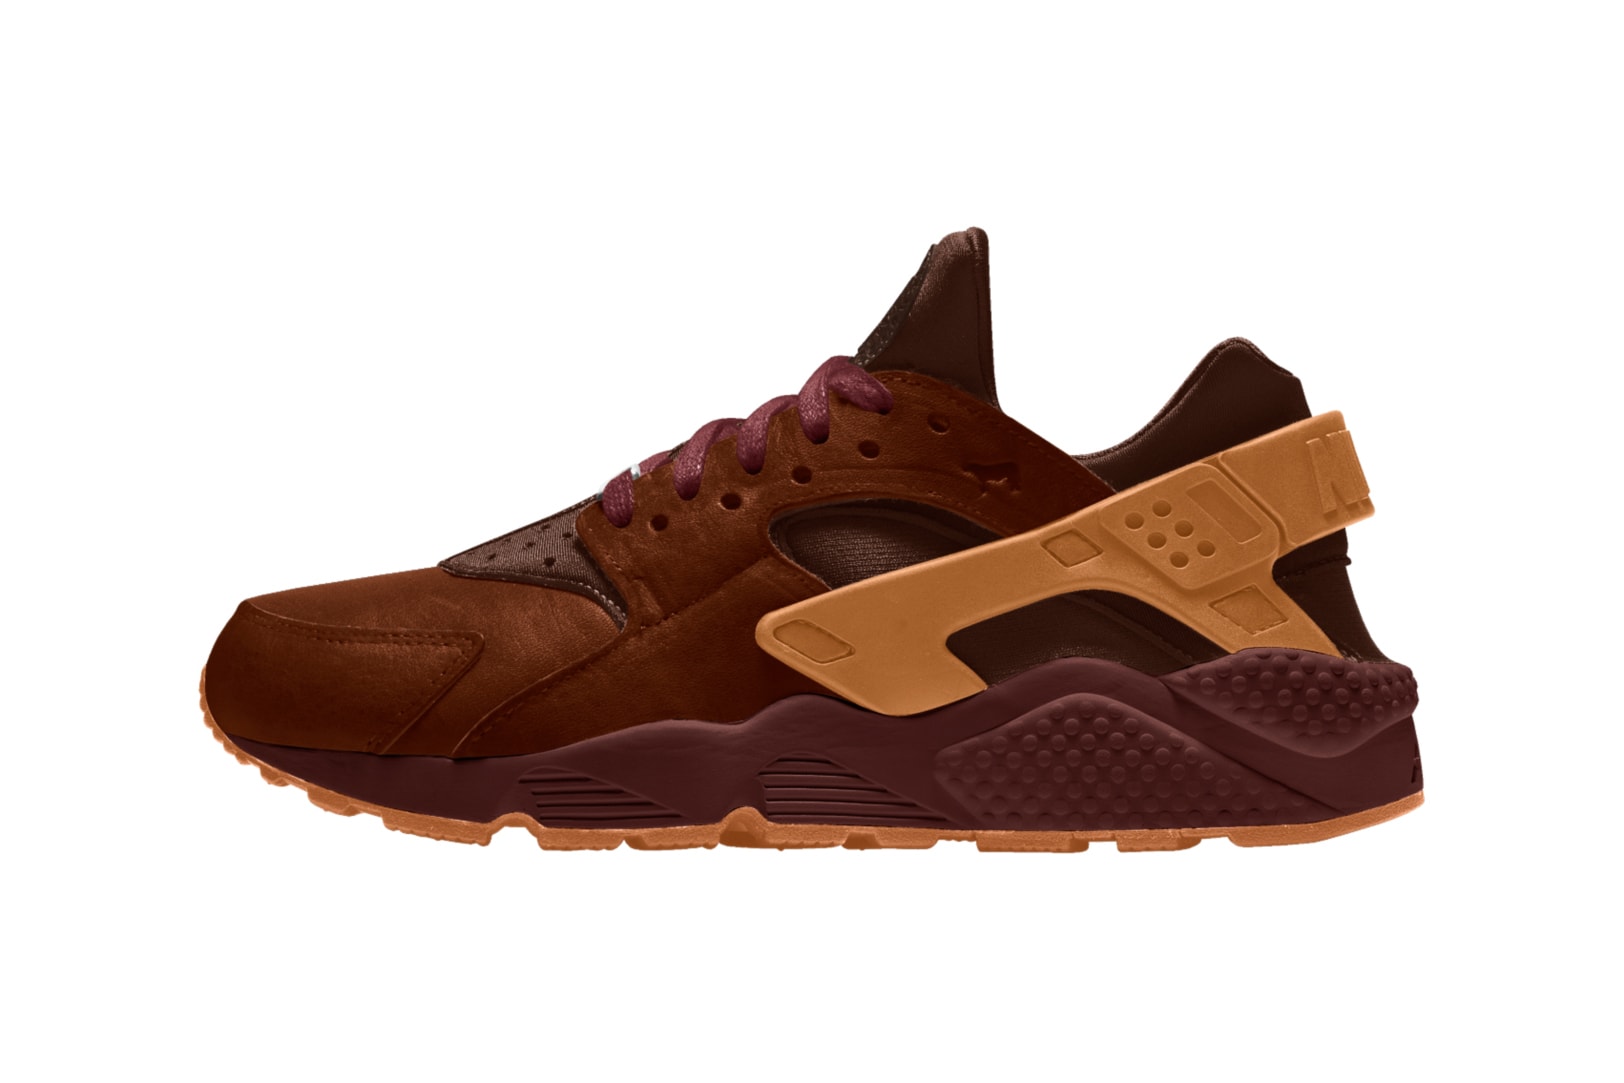 Will Leather Goods NIKEiD Air Force 1 Huarache Max 90